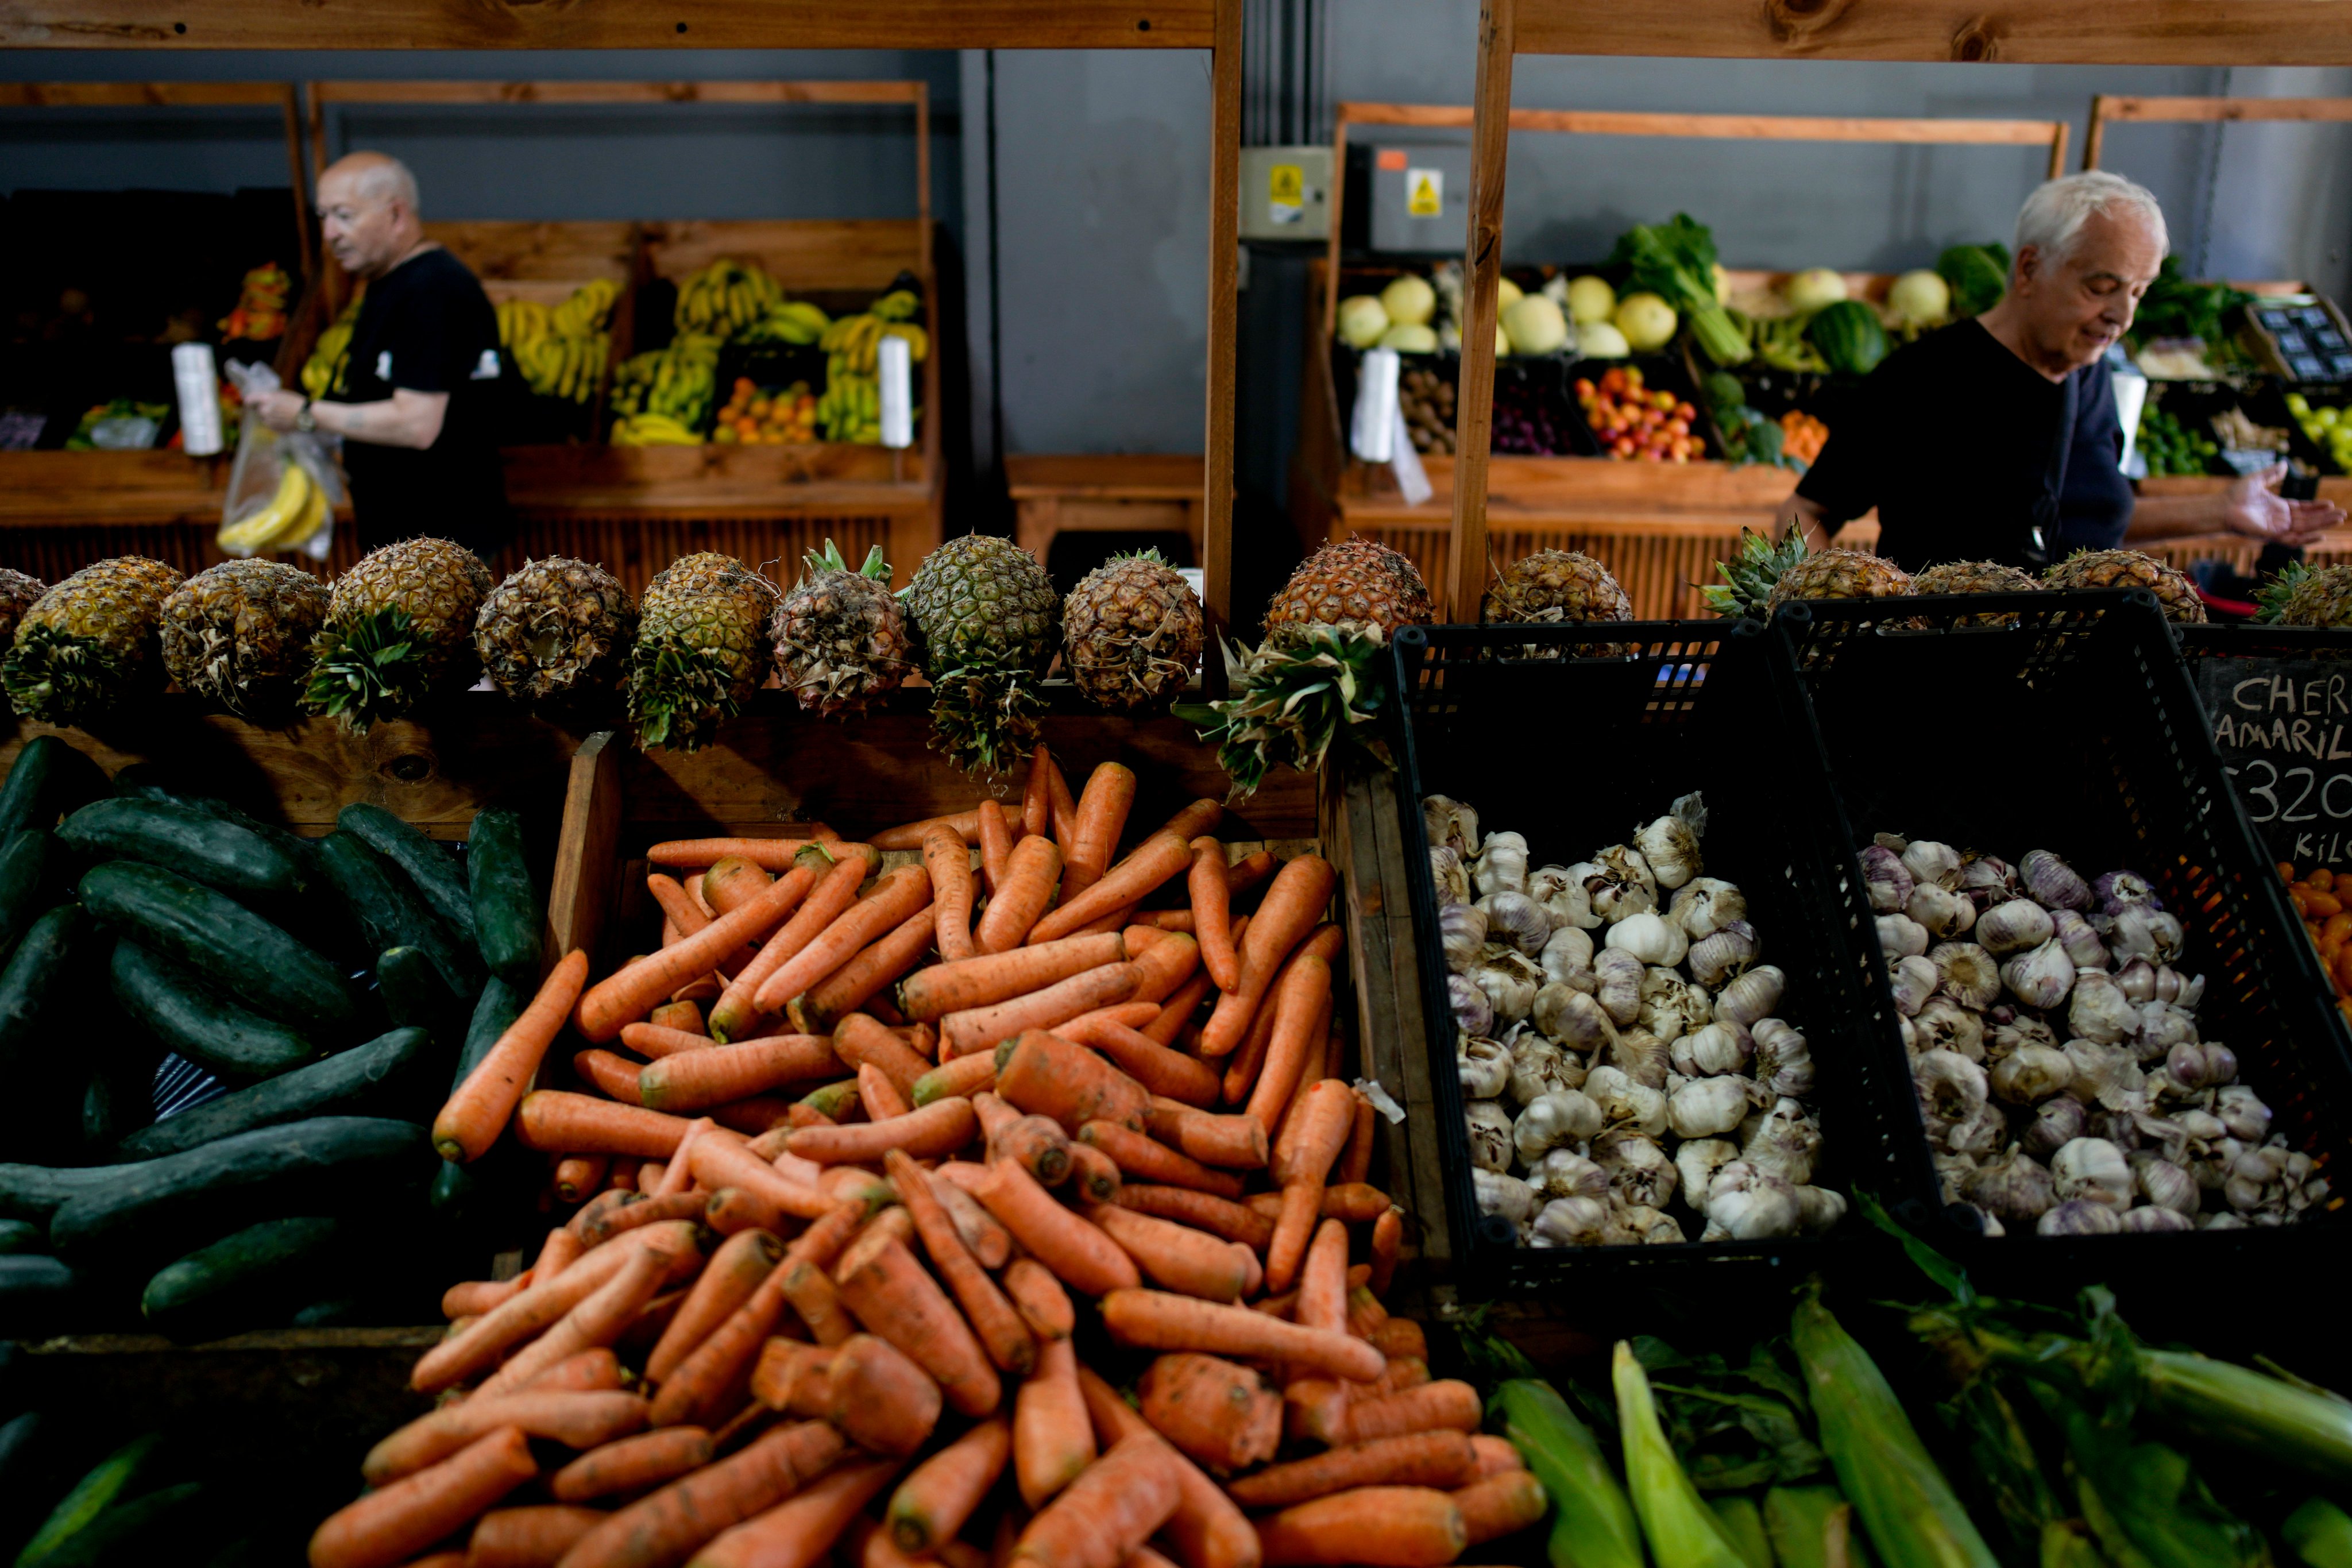 Shoppers buy vegetables in Buenos Aires, Argentina, on December 11. The persistence of debt distress and high interest rates have left consumers and many developing countries in potential financial peril at the cusp of a global downturn. Photo: AP 